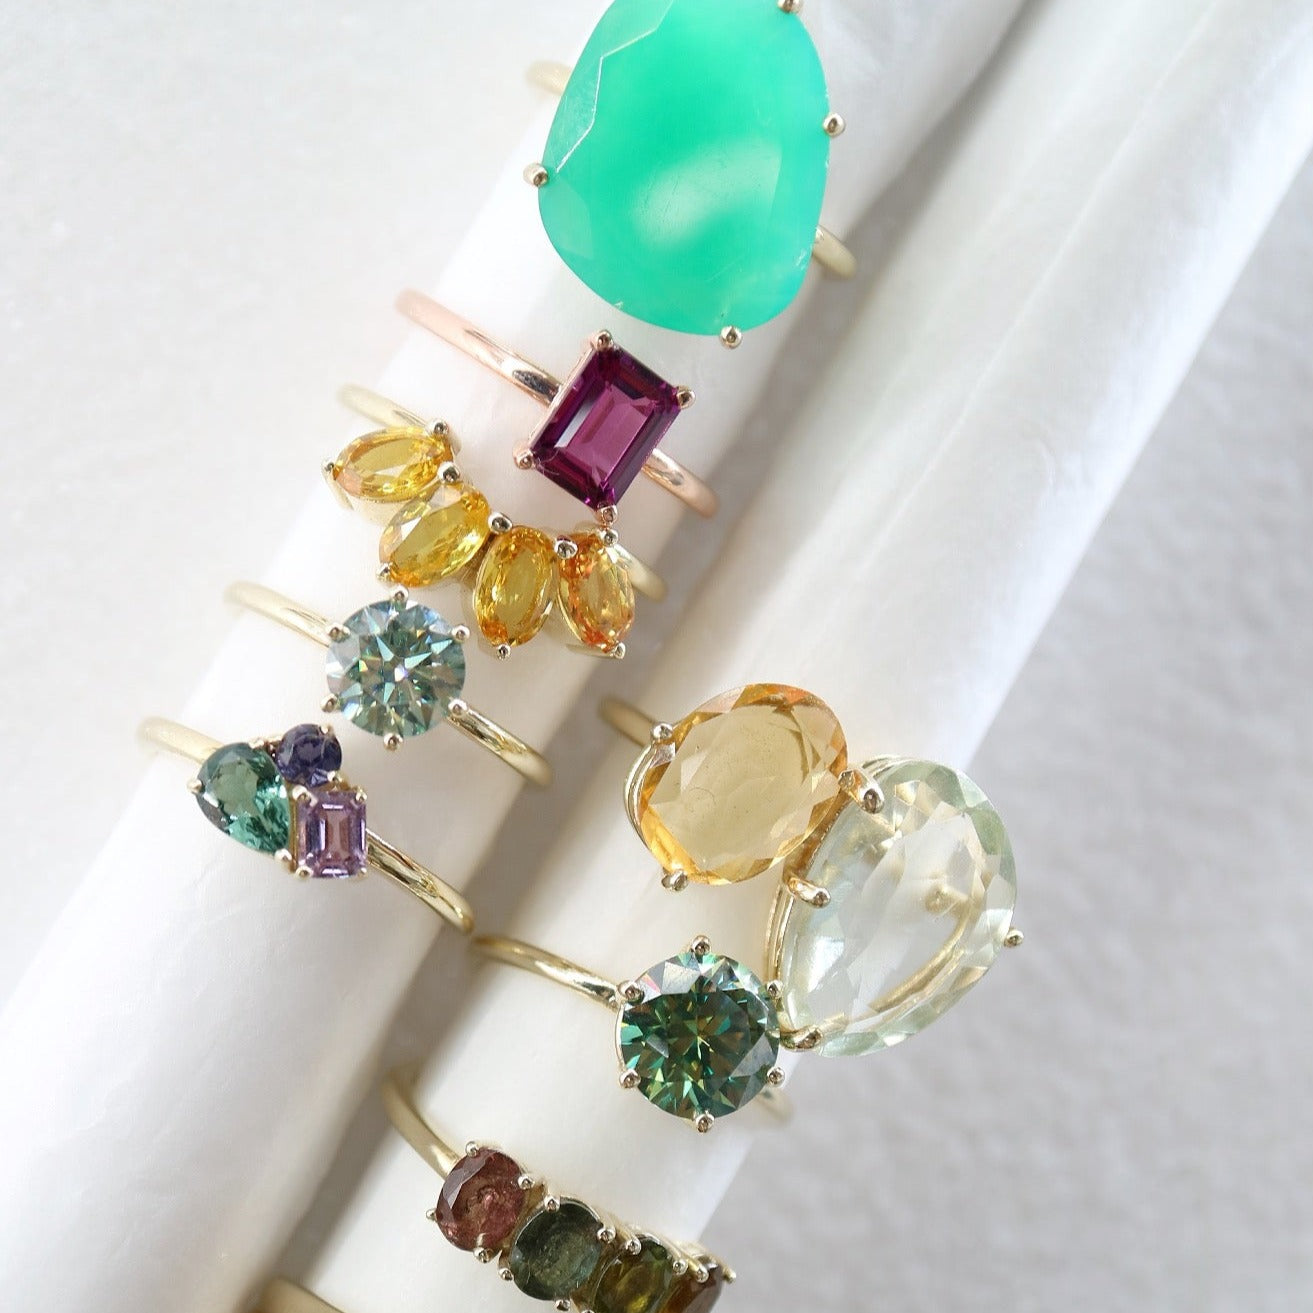 Solid gold and gemstone rings from Collective & Co jewellery